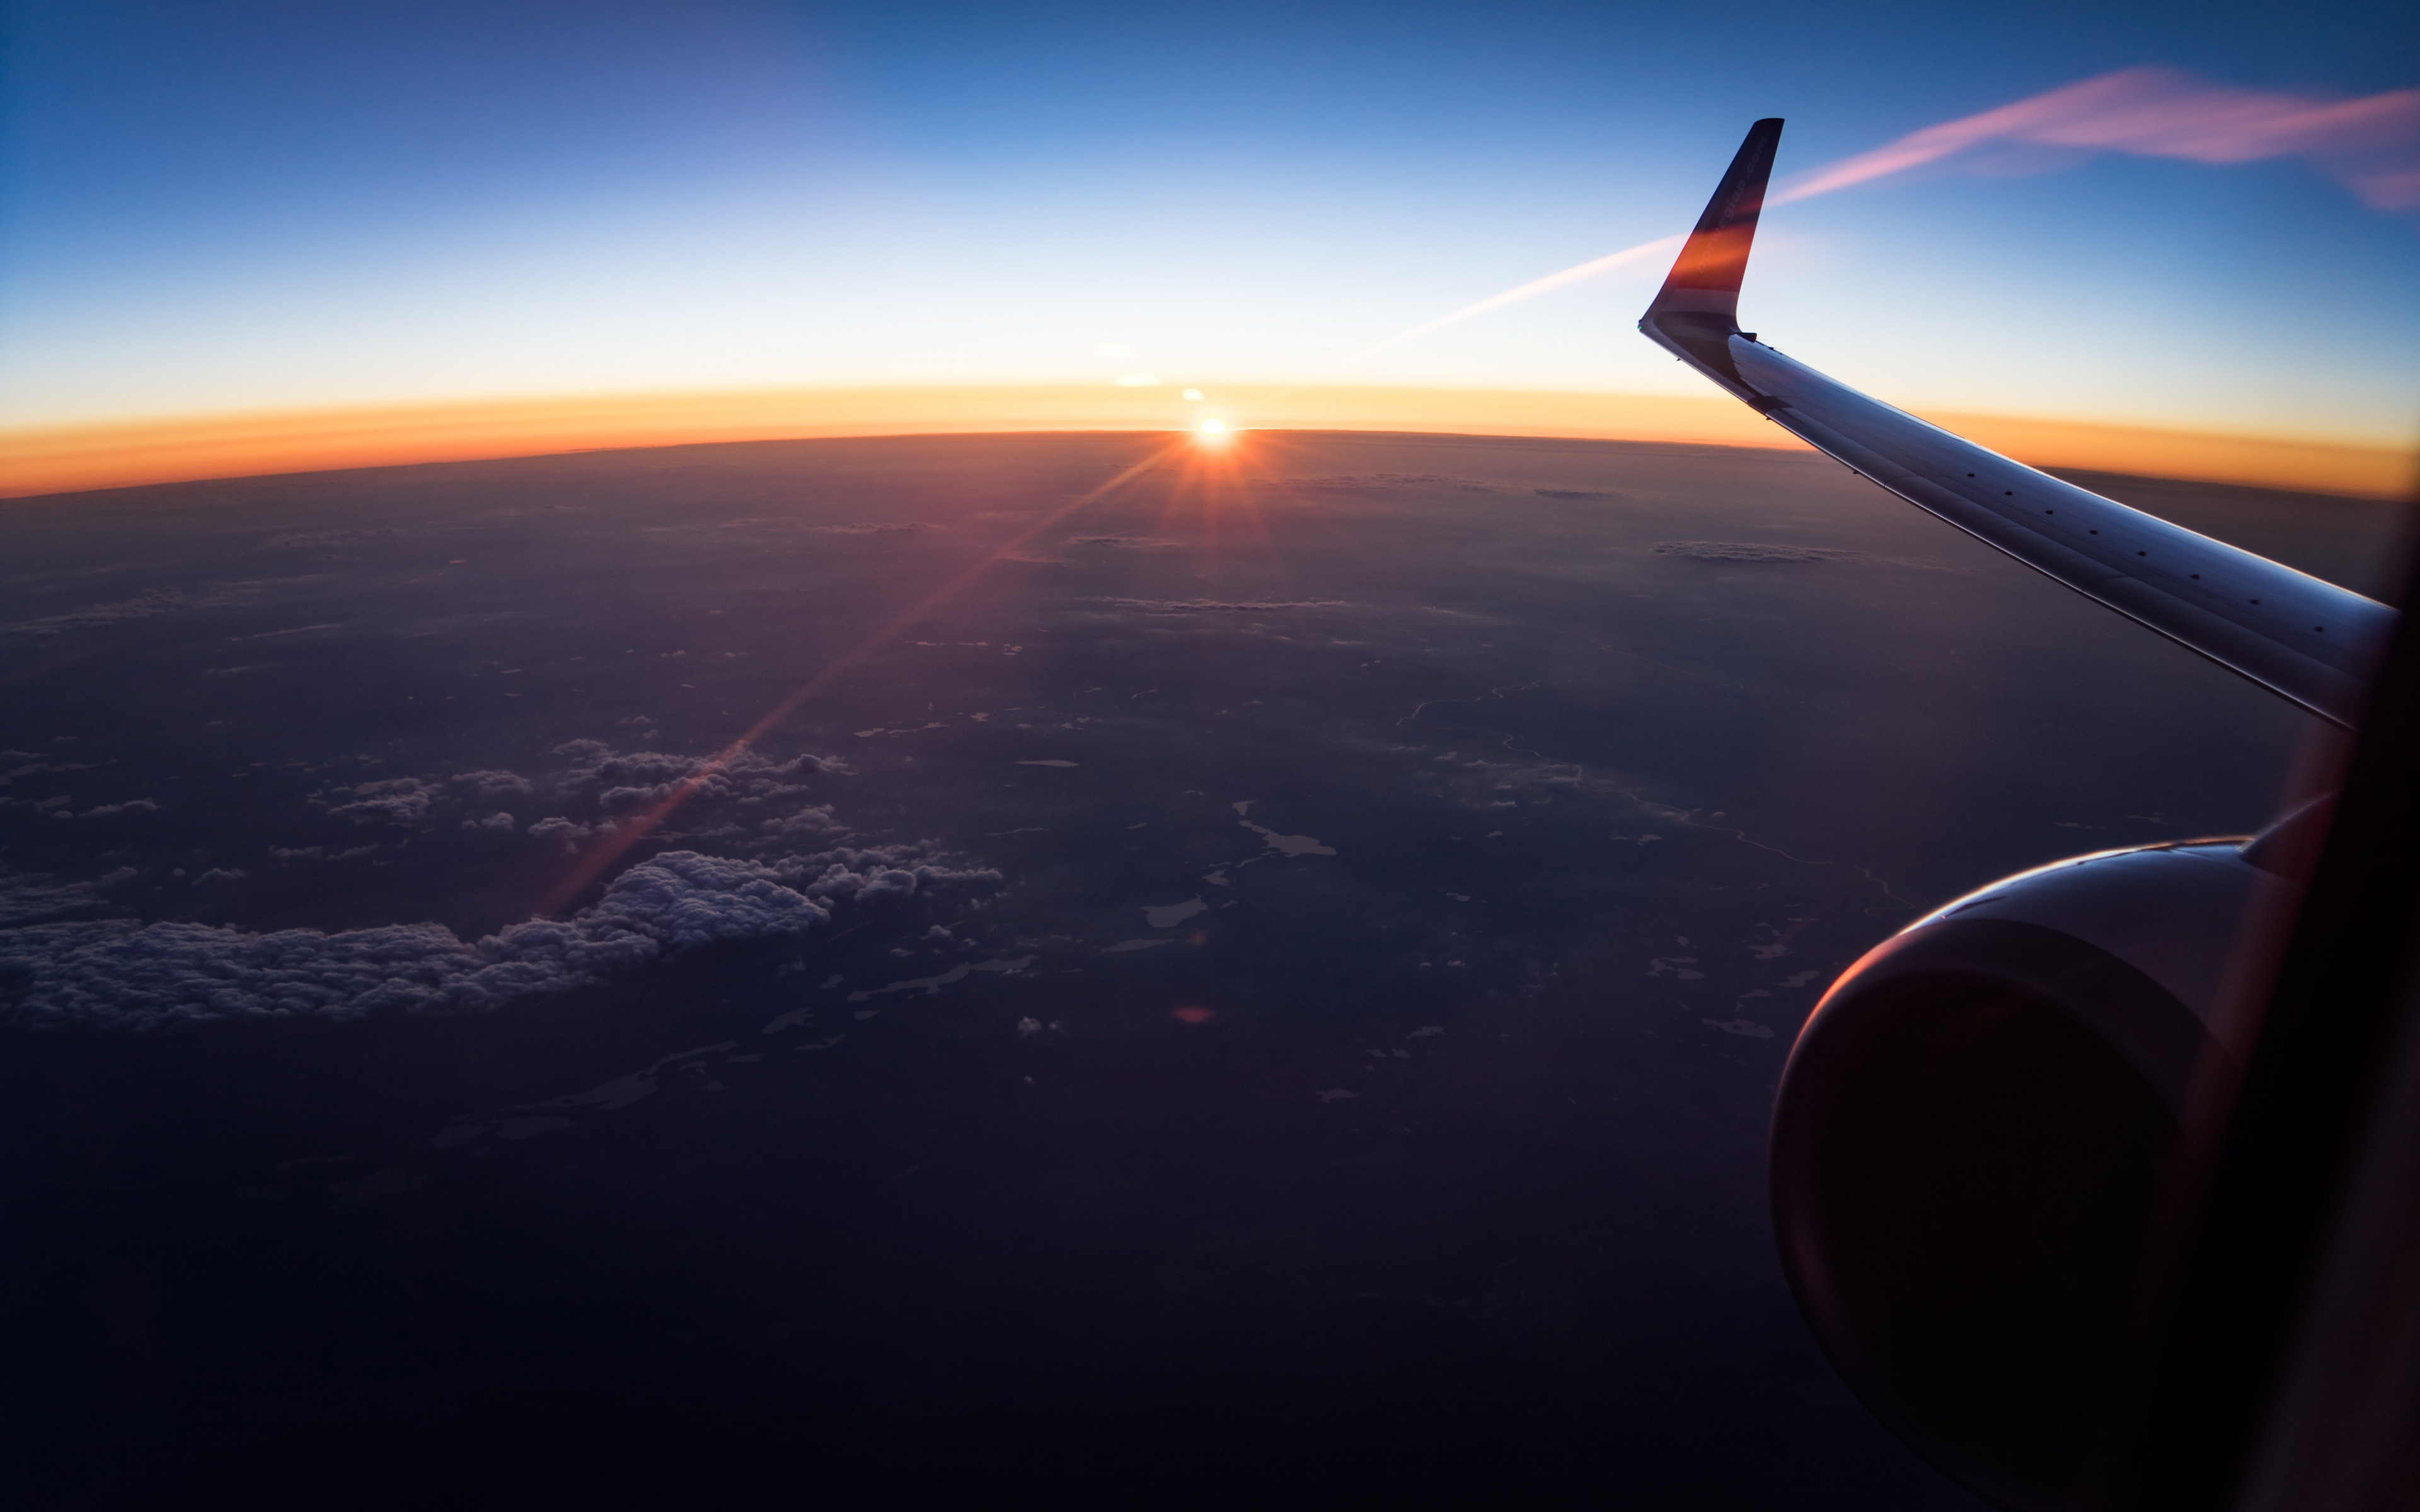 In the plane watching the sunset wallpaper 3840x2400